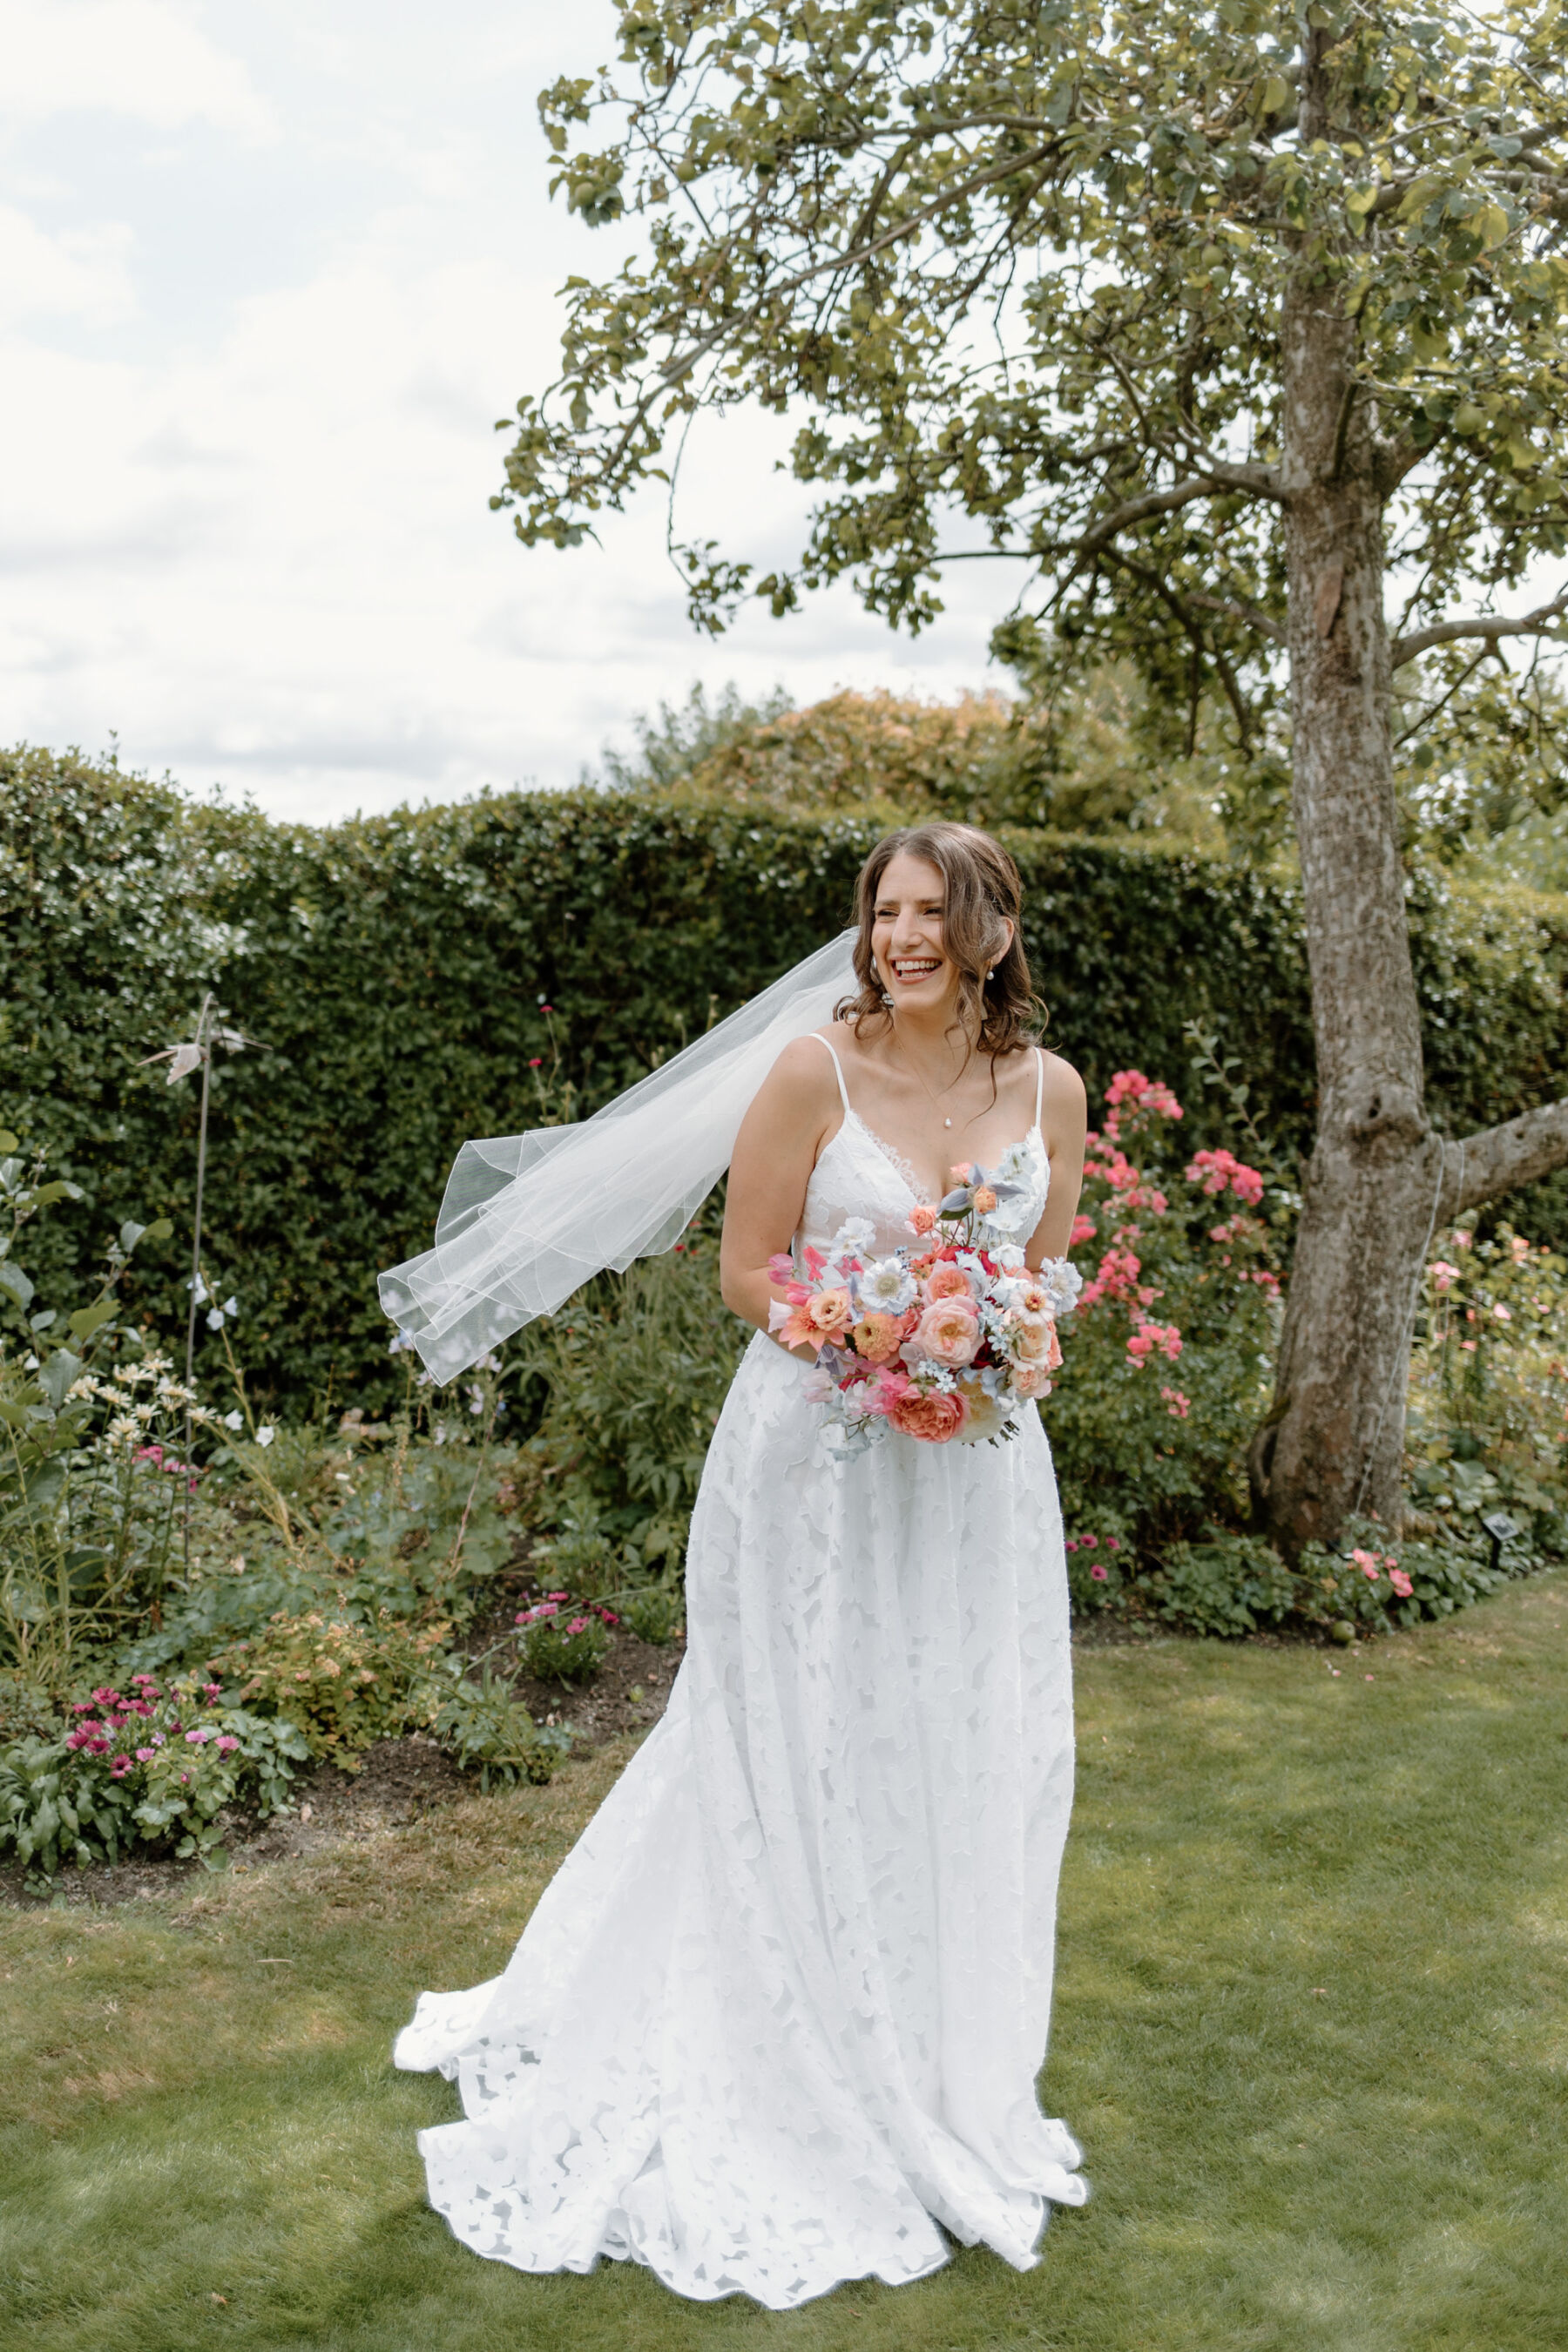 Bride wearing a Truvelle Wedding Dress, carrying a pastel colour summer wedding bouquet.